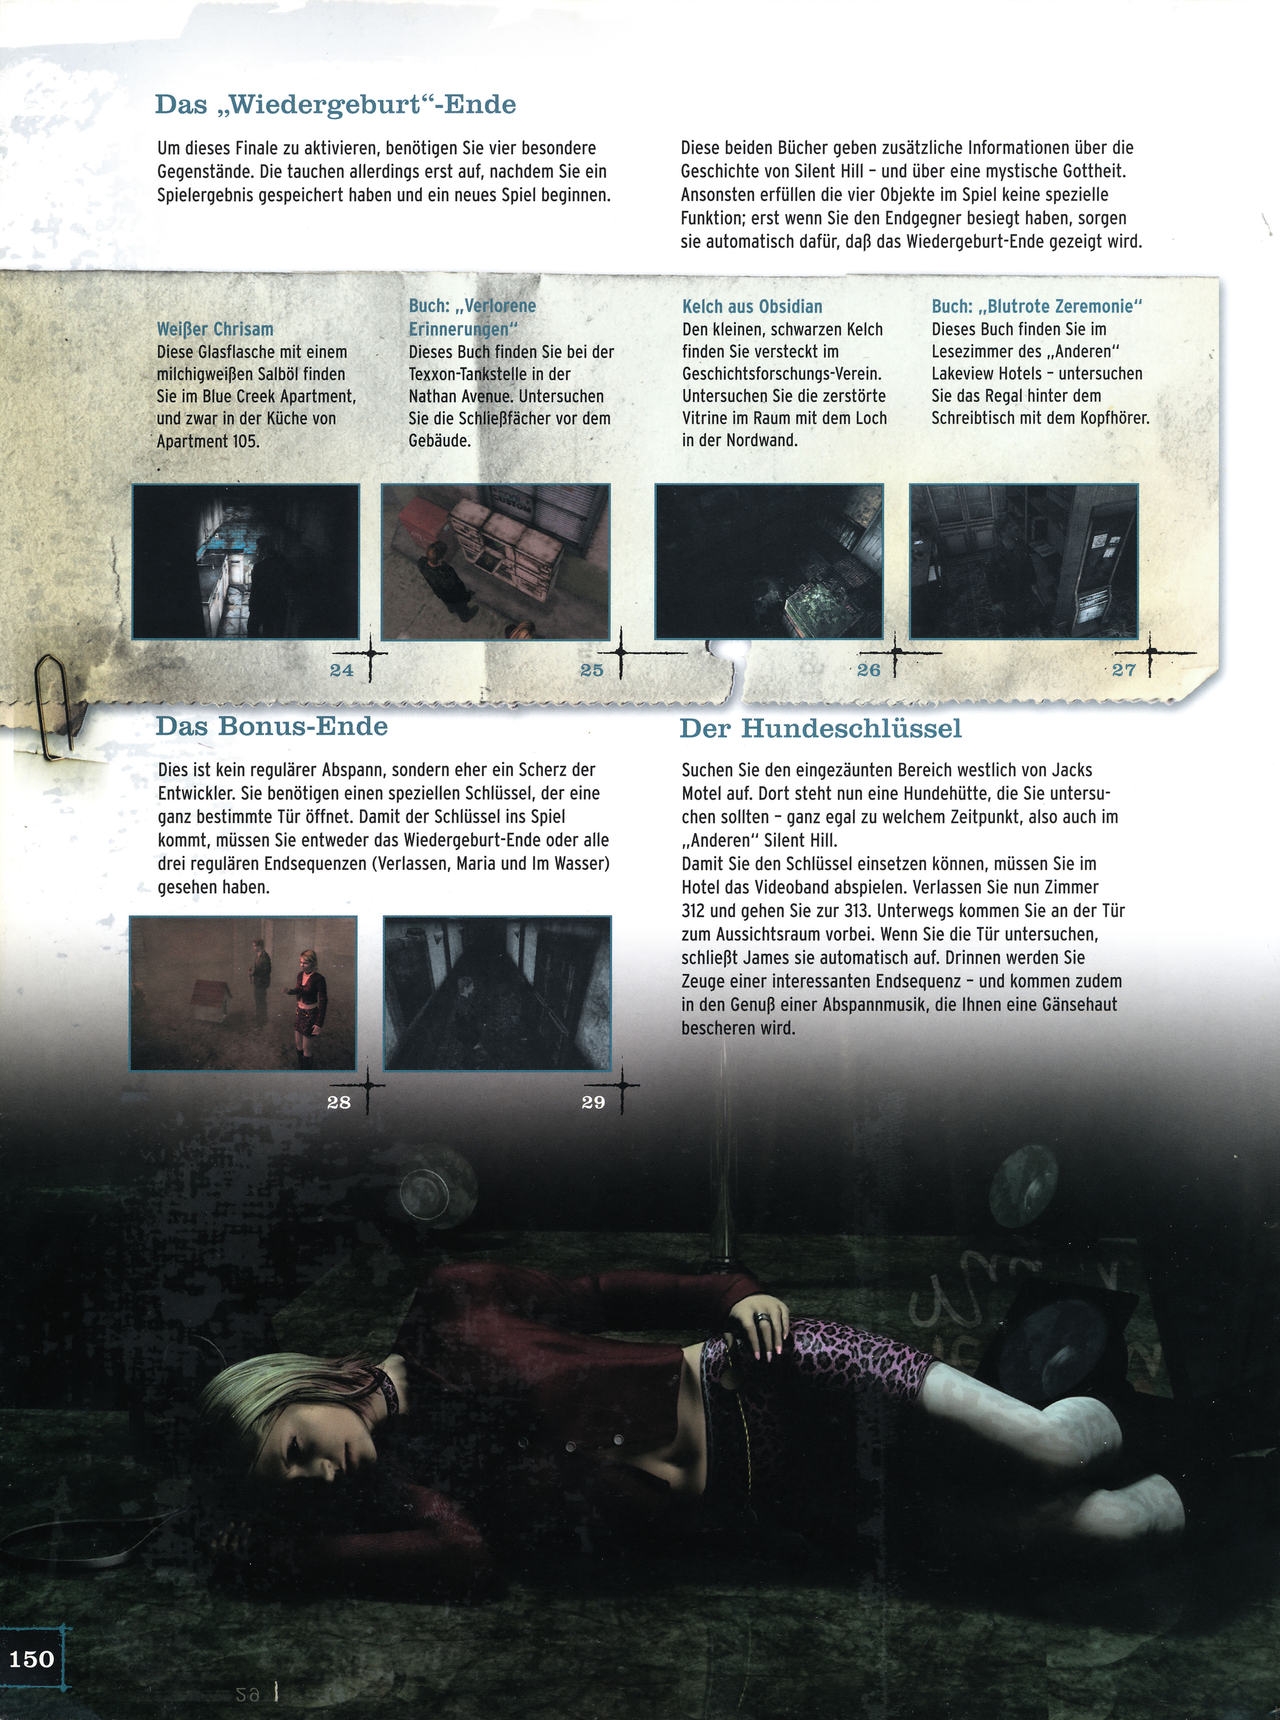 Silent Hill 2 Official Strategy Guide Authoritzed Collection 149